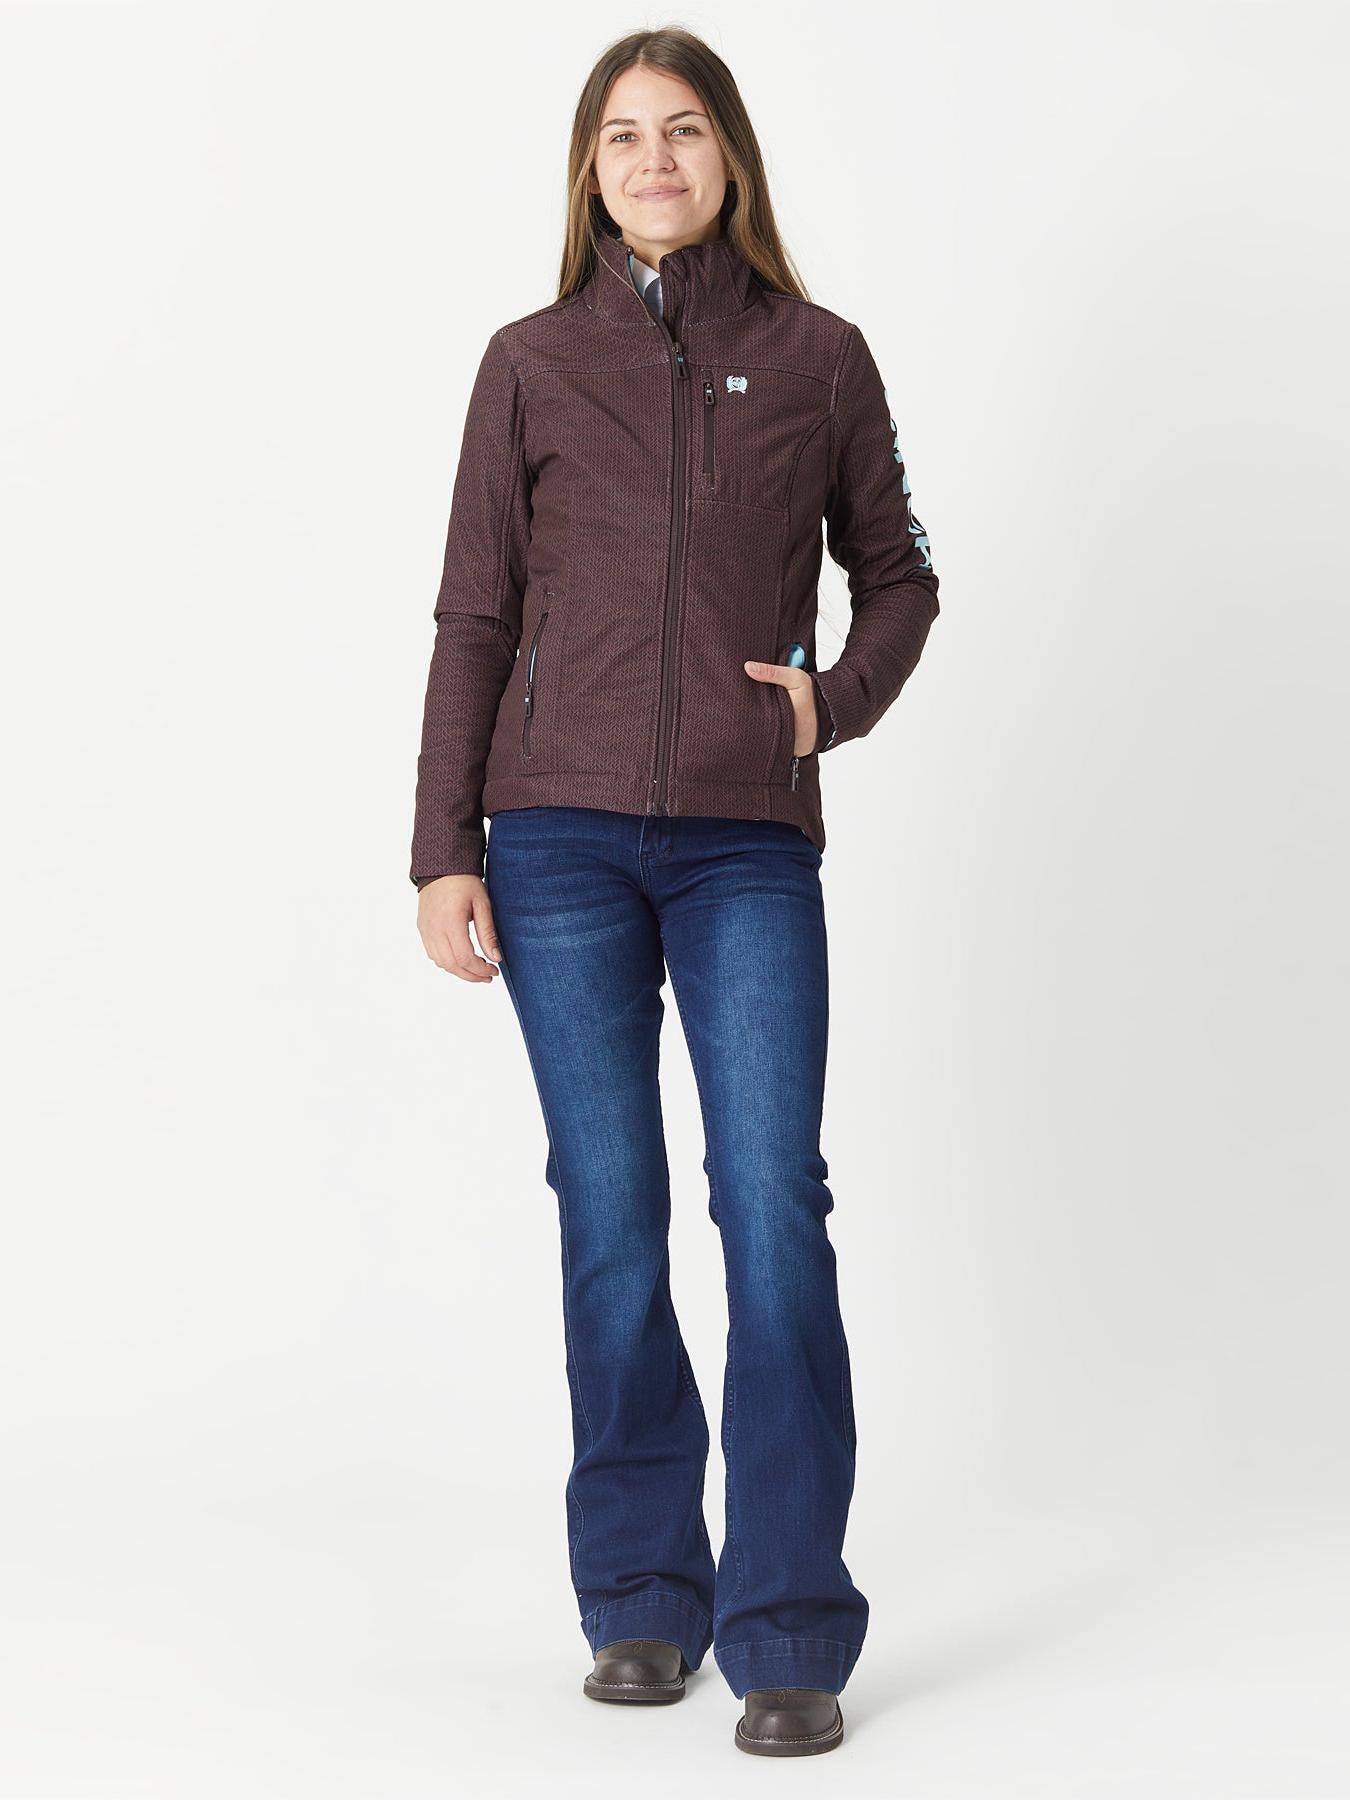 Cinch Womens Concealed Carry Print Bond Jacket 